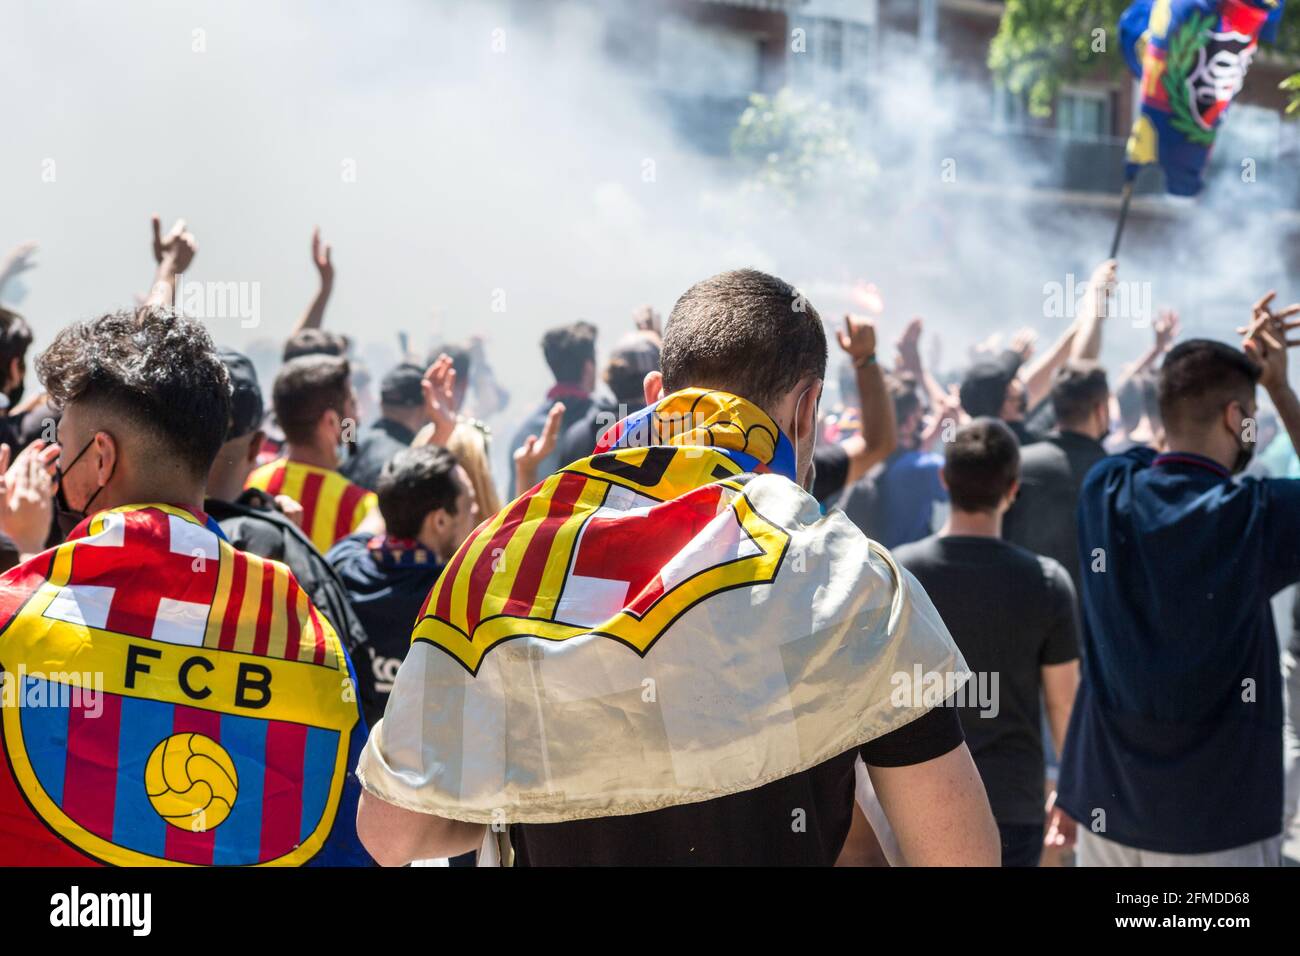 Barcelona, Spain. 08th May, 2021. Fans are seen wrapped with Football Club Barcelona flags. The ultras supporter group of Football Club Barcelona, Boixos Nois (Crazy Boys) have gathered outside the Camp Nou stadium to motivate the team before the match against Club Atletico de Madrid for the 35th round of La Liga, the Spanish football league. Barça's victory will put the team, currently in third place, ahead of Atletico de Madrid, which occupies the first position. (Photo by Thiago Prudencio/SOPA Images/Sipa USA) Credit: Sipa USA/Alamy Live News Stock Photo